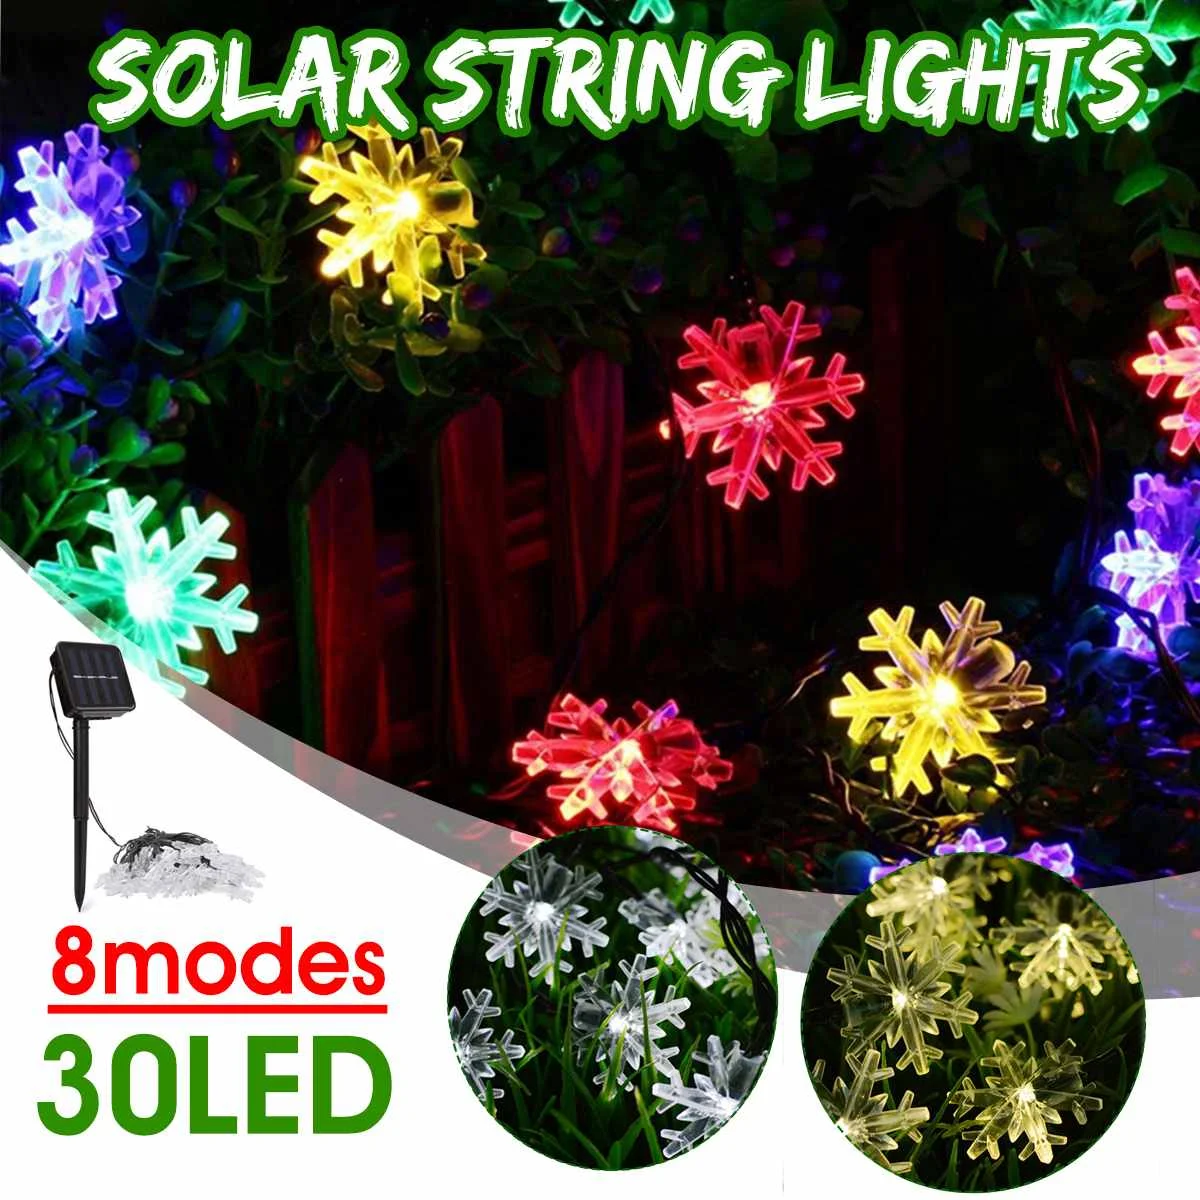 

Smuxi 6.5m 30LED 8Modes Snowflake Solar String Lights Outdoor Garden Decor For Christmas Wedding Party New Year Halloween